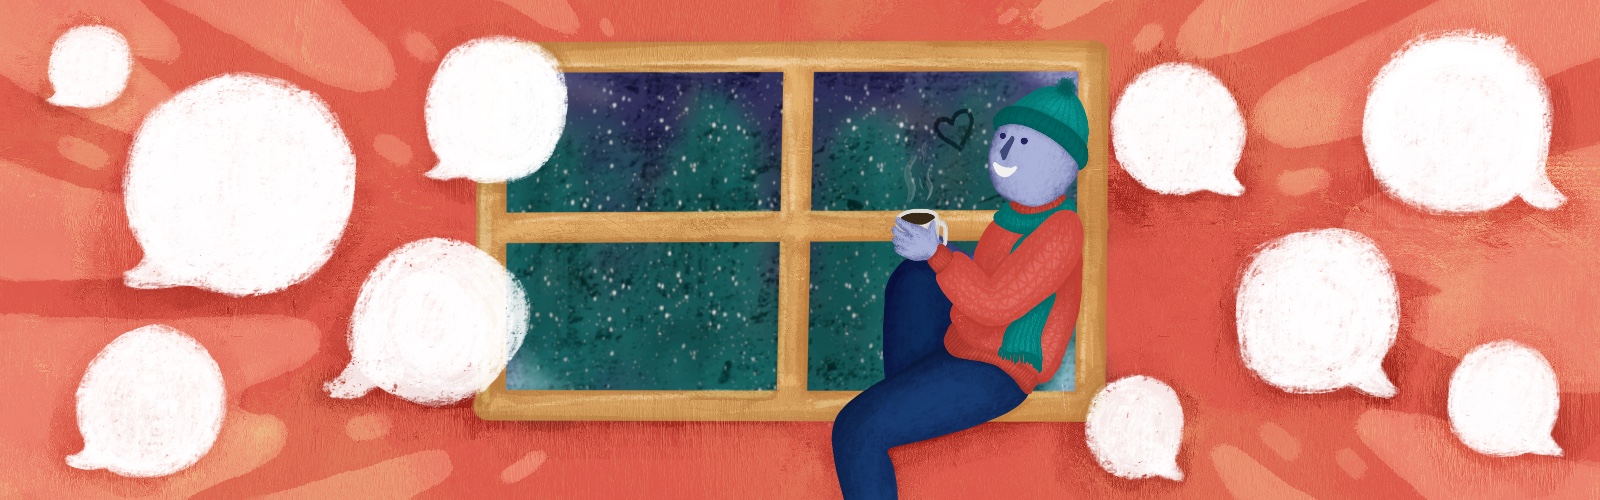 Graphic of person sitting in front of cold, frosted window. Conversation bubbles are surrounding them.